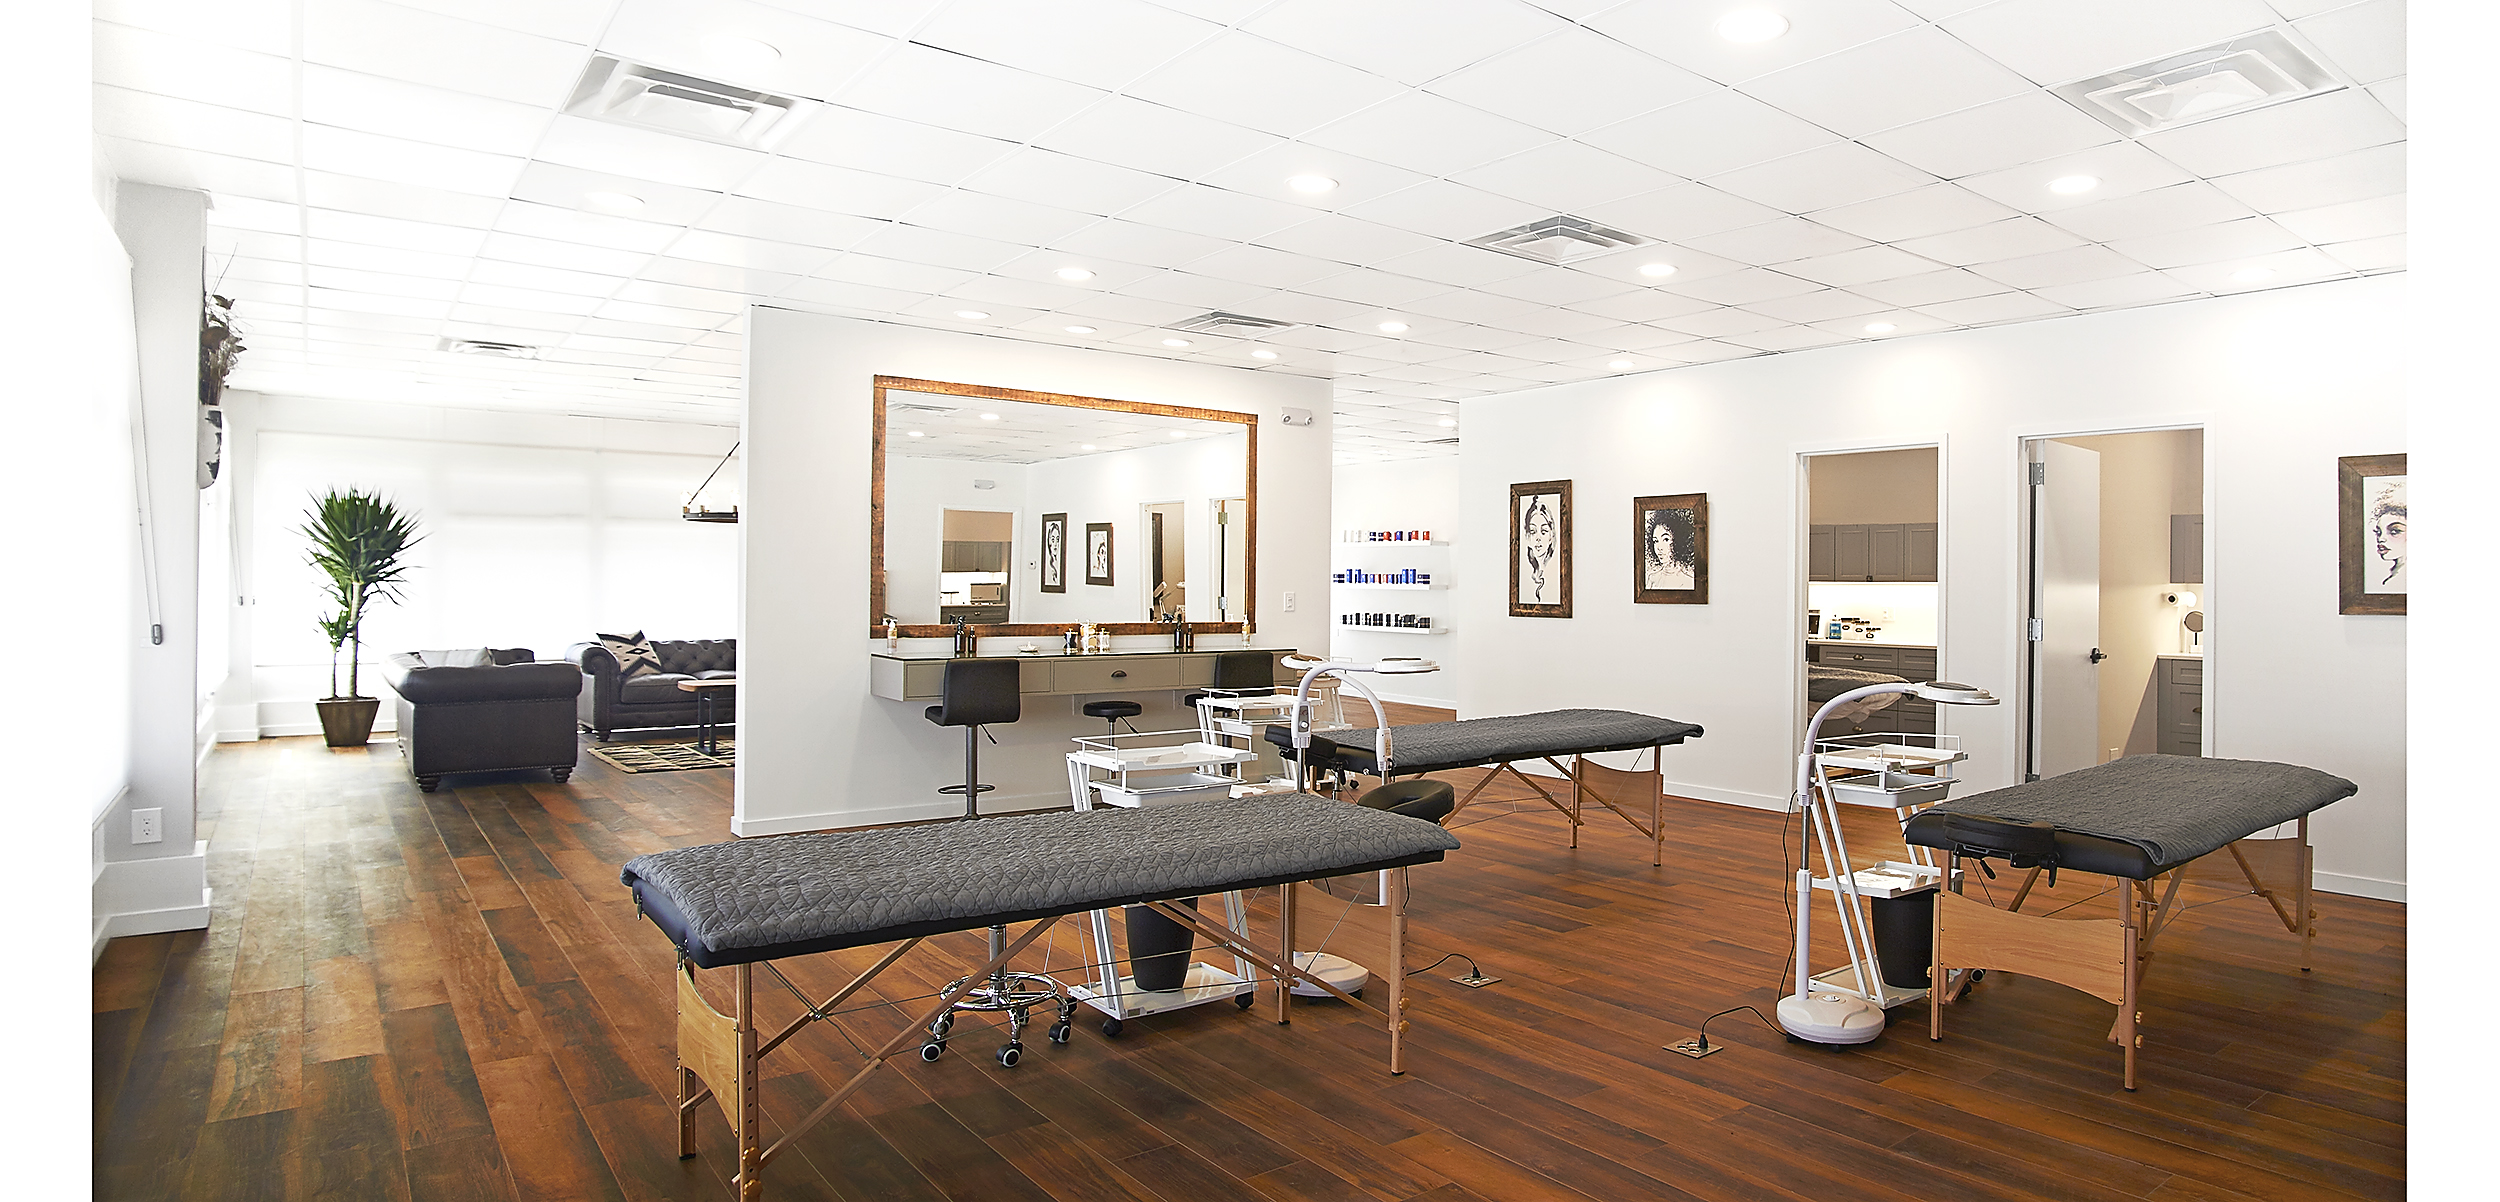  A new-concept beauty and skincare spa in Long Island, New York, offering the best products and services for the skin, including: microblading, custom facials, lash lifts, chemical peels and more. 